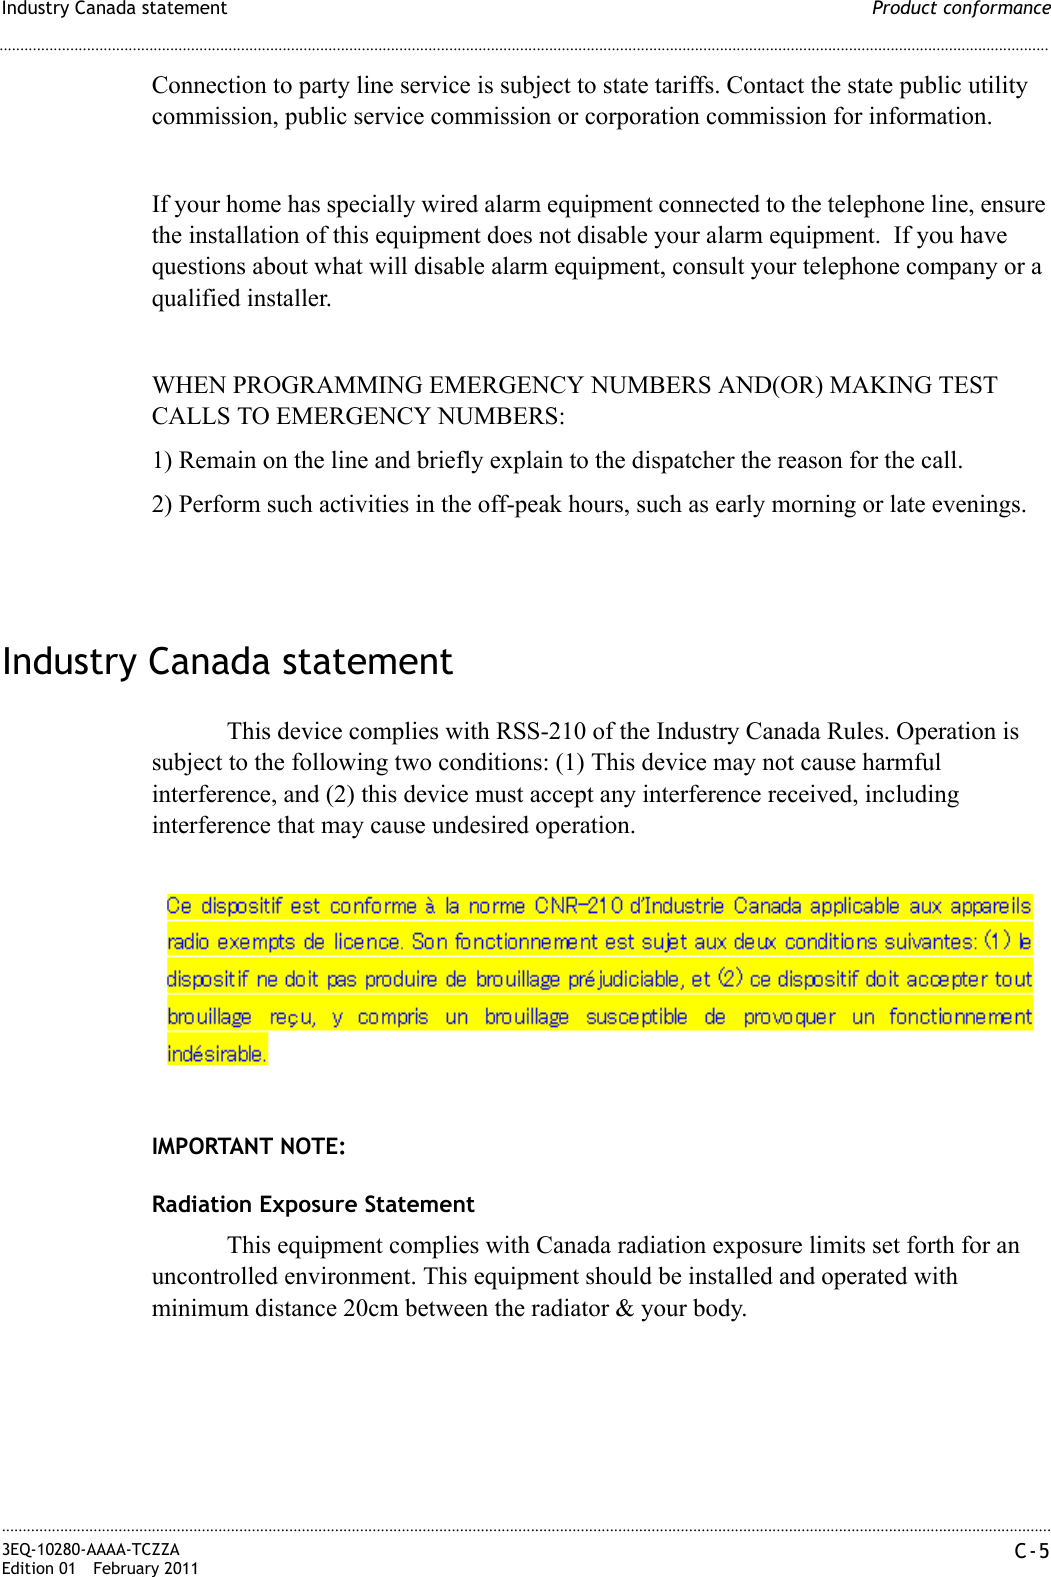 Product conformanceIndustry Canada statement............................................................................................................................................................................................................................................................3EQ-10280-AAAA-TCZZAEdition 01 February 2011 C-5............................................................................................................................................................................................................................................................Connection to party line service is subject to state tariffs. Contact the state public utility commission, public service commission or corporation commission for information.If your home has specially wired alarm equipment connected to the telephone line, ensure the installation of this equipment does not disable your alarm equipment.  If you have questions about what will disable alarm equipment, consult your telephone company or a qualified installer.WHEN PROGRAMMING EMERGENCY NUMBERS AND(OR) MAKING TEST CALLS TO EMERGENCY NUMBERS:1) Remain on the line and briefly explain to the dispatcher the reason for the call.2) Perform such activities in the off-peak hours, such as early morning or late evenings.Industry Canada statementThis device complies with RSS-210 of the Industry Canada Rules. Operation is subject to the following two conditions: (1) This device may not cause harmful interference, and (2) this device must accept any interference received, including interference that may cause undesired operation.IMPORTANT NOTE:Radiation Exposure StatementThis equipment complies with Canada radiation exposure limits set forth for an uncontrolled environment. This equipment should be installed and operated with minimum distance 20cm between the radiator &amp; your body.